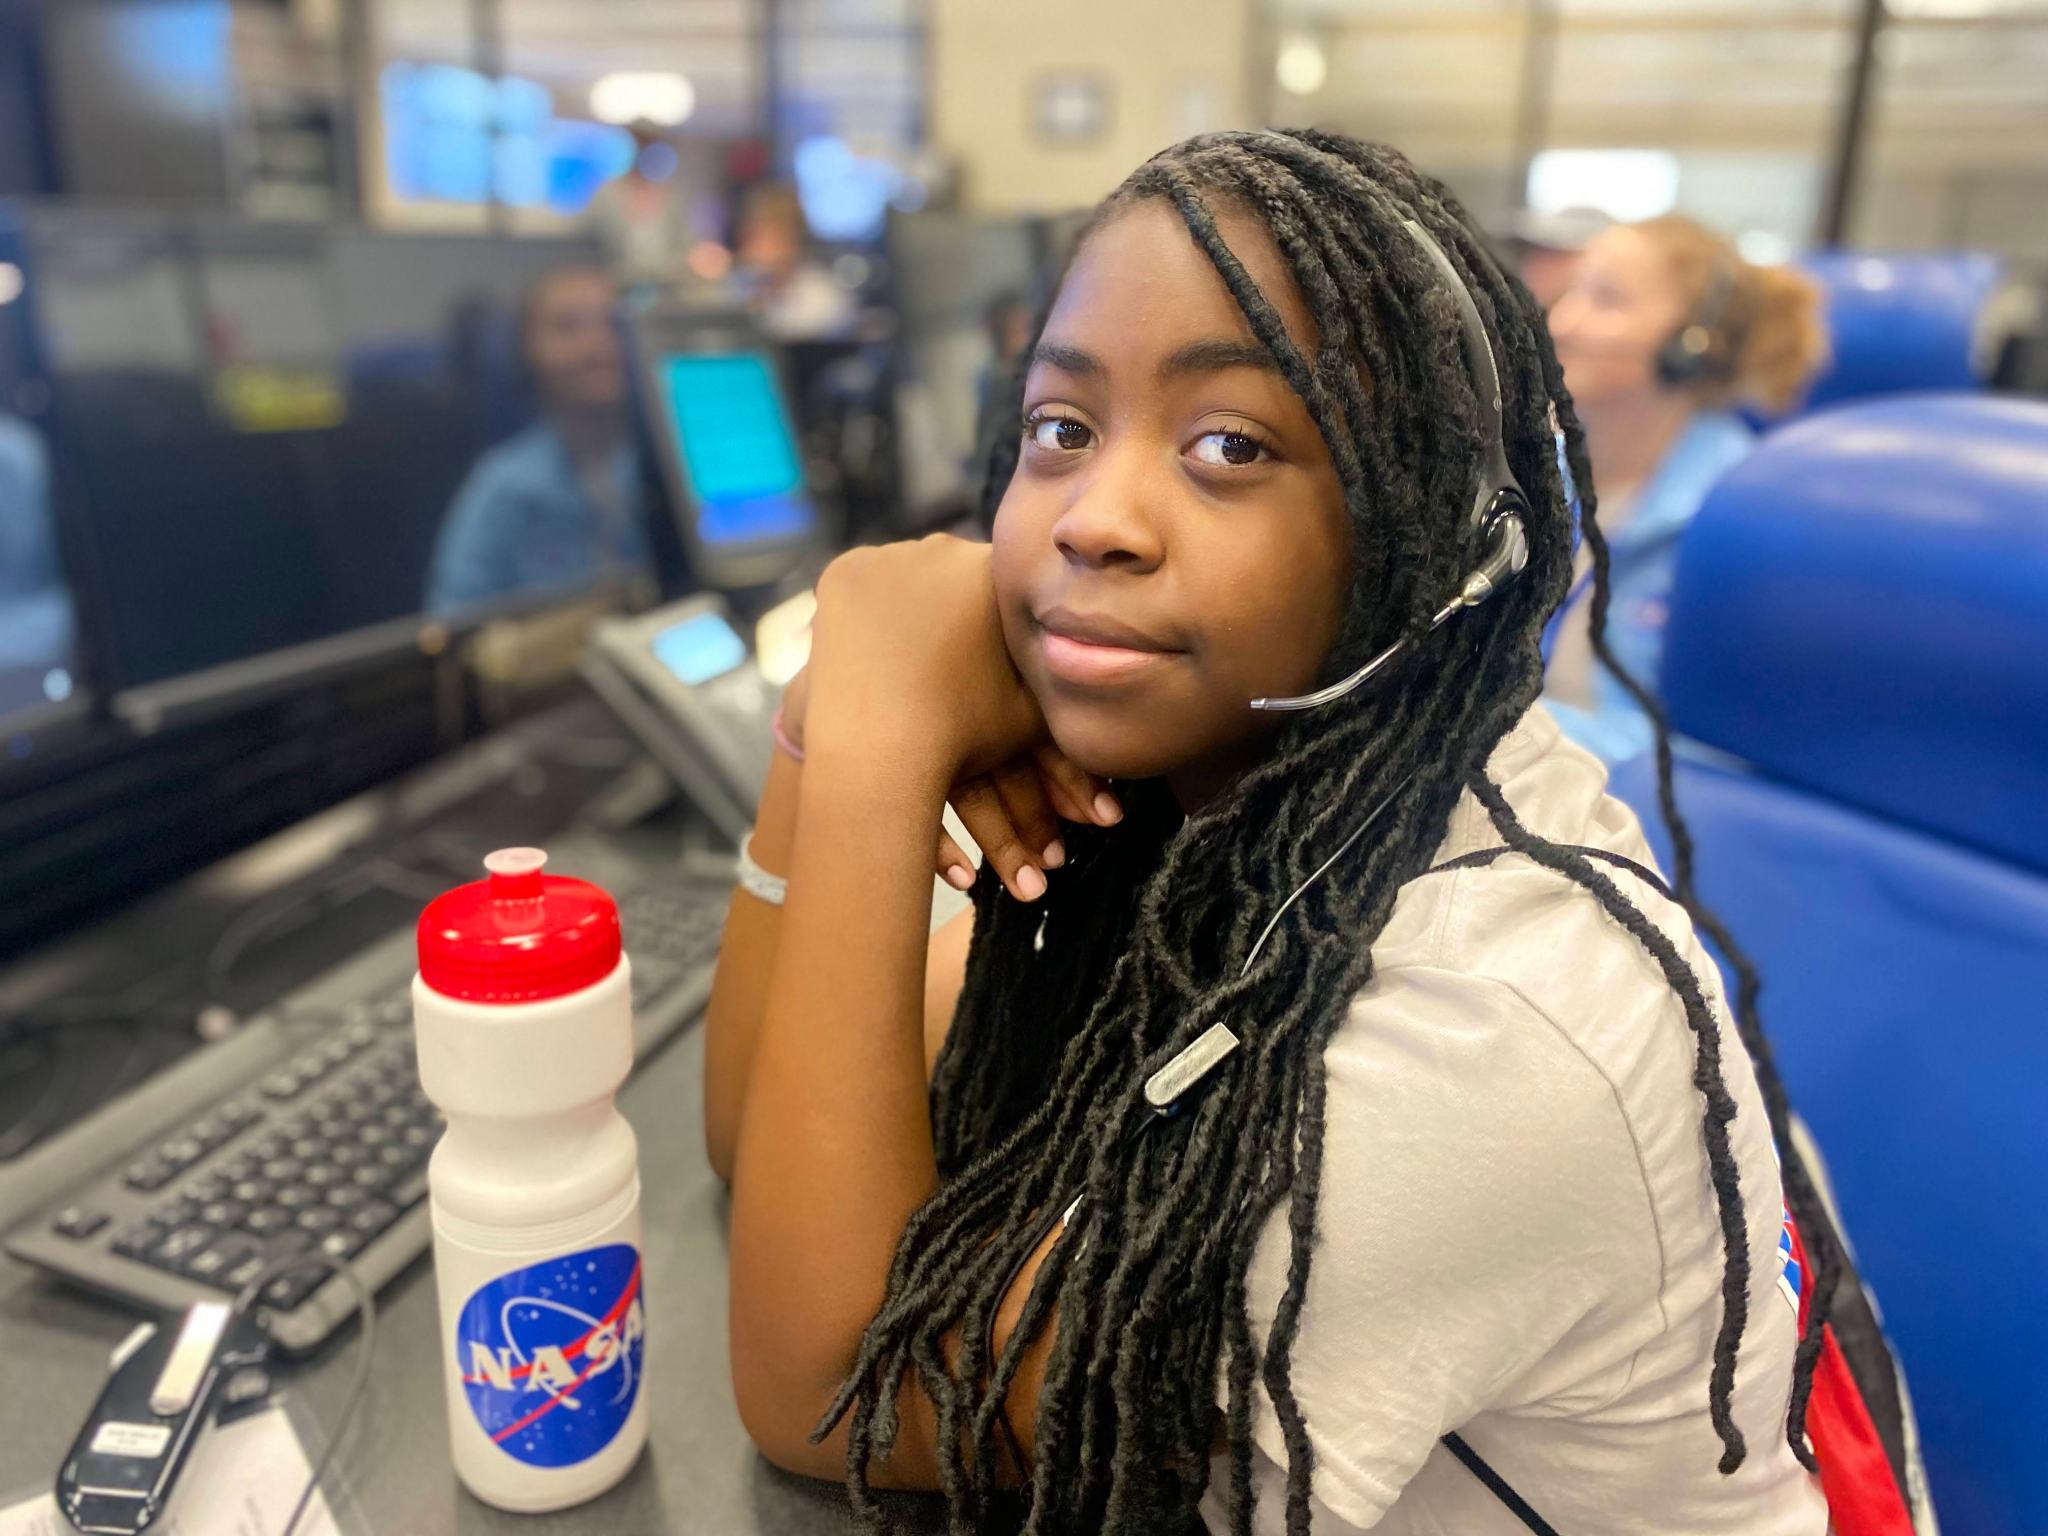 A girl wearing a headset looks towards the camera while sitting in front a a computer console in the range control center. A white water bottle with a blue, red and white NASA meatball sticker sits on the desk in front of her. The red top of the water bottle is closed tightly.